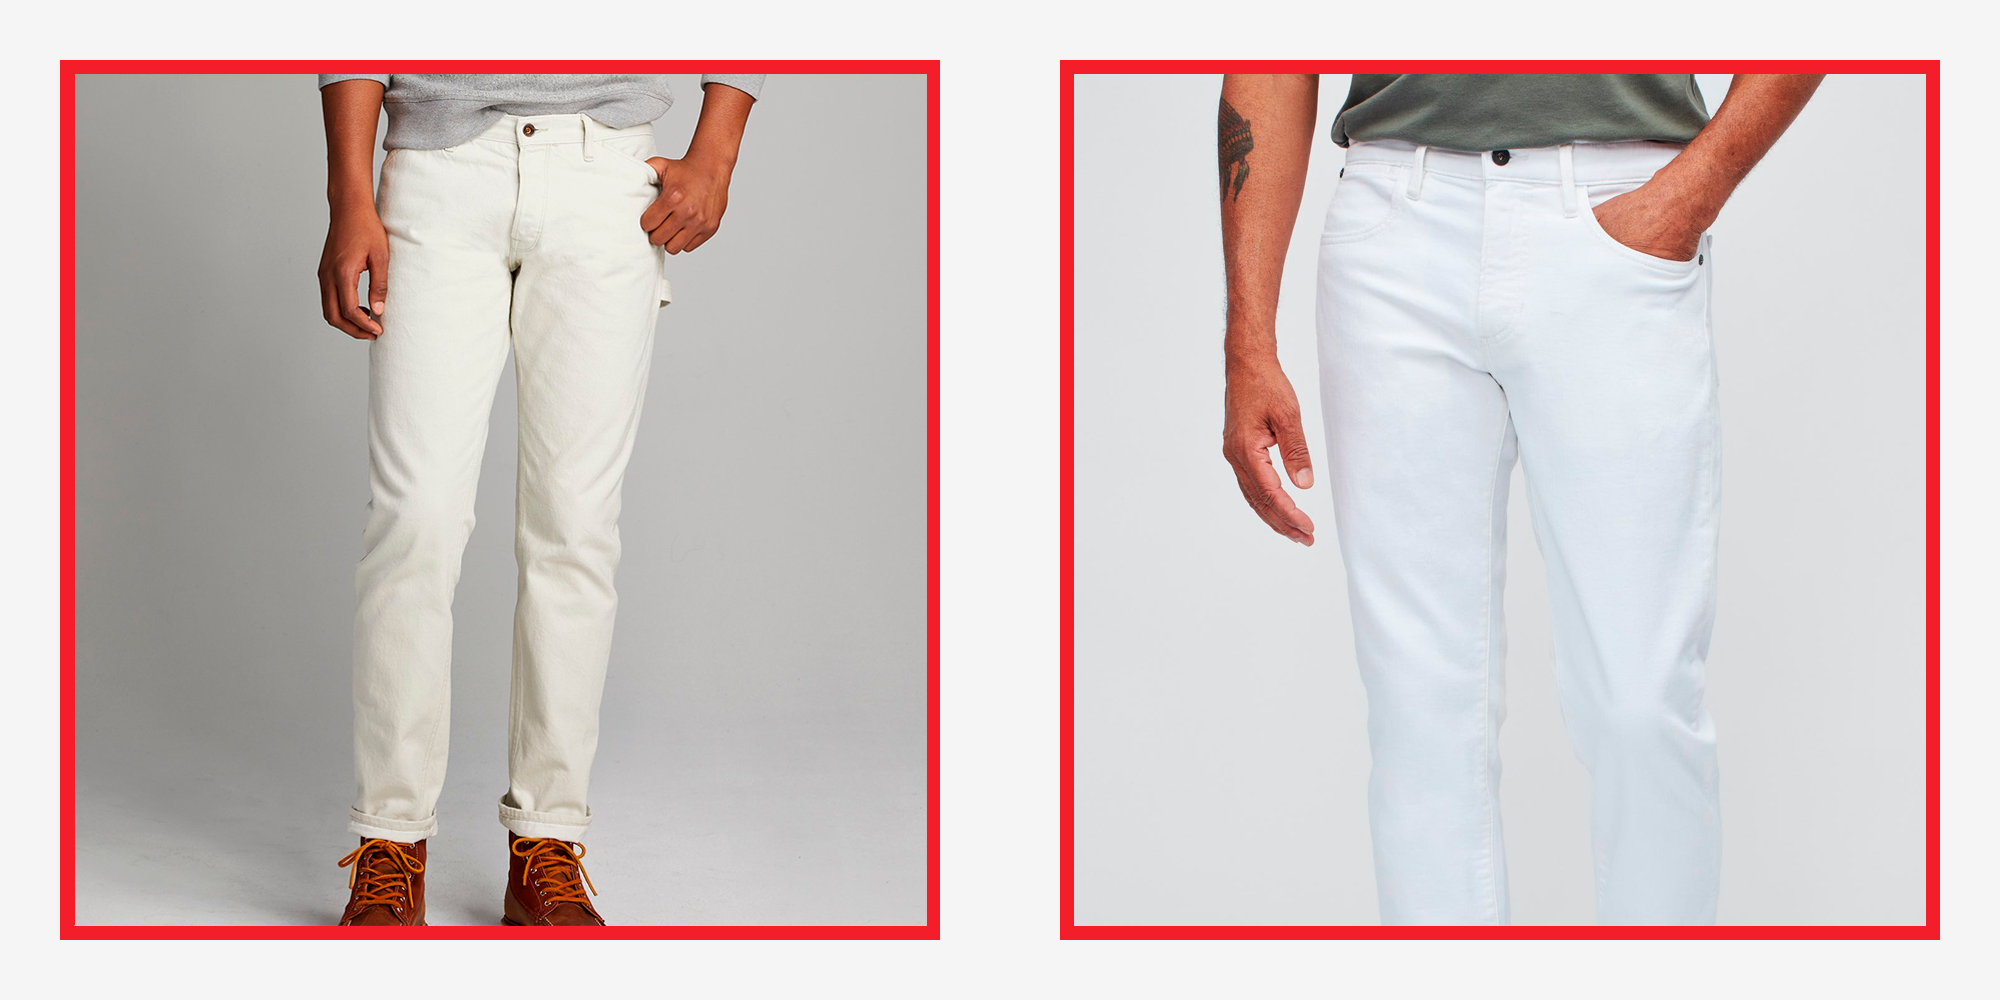 Best White Jeans for Men 2021: Top Brands, Styles, Fits to Try Now